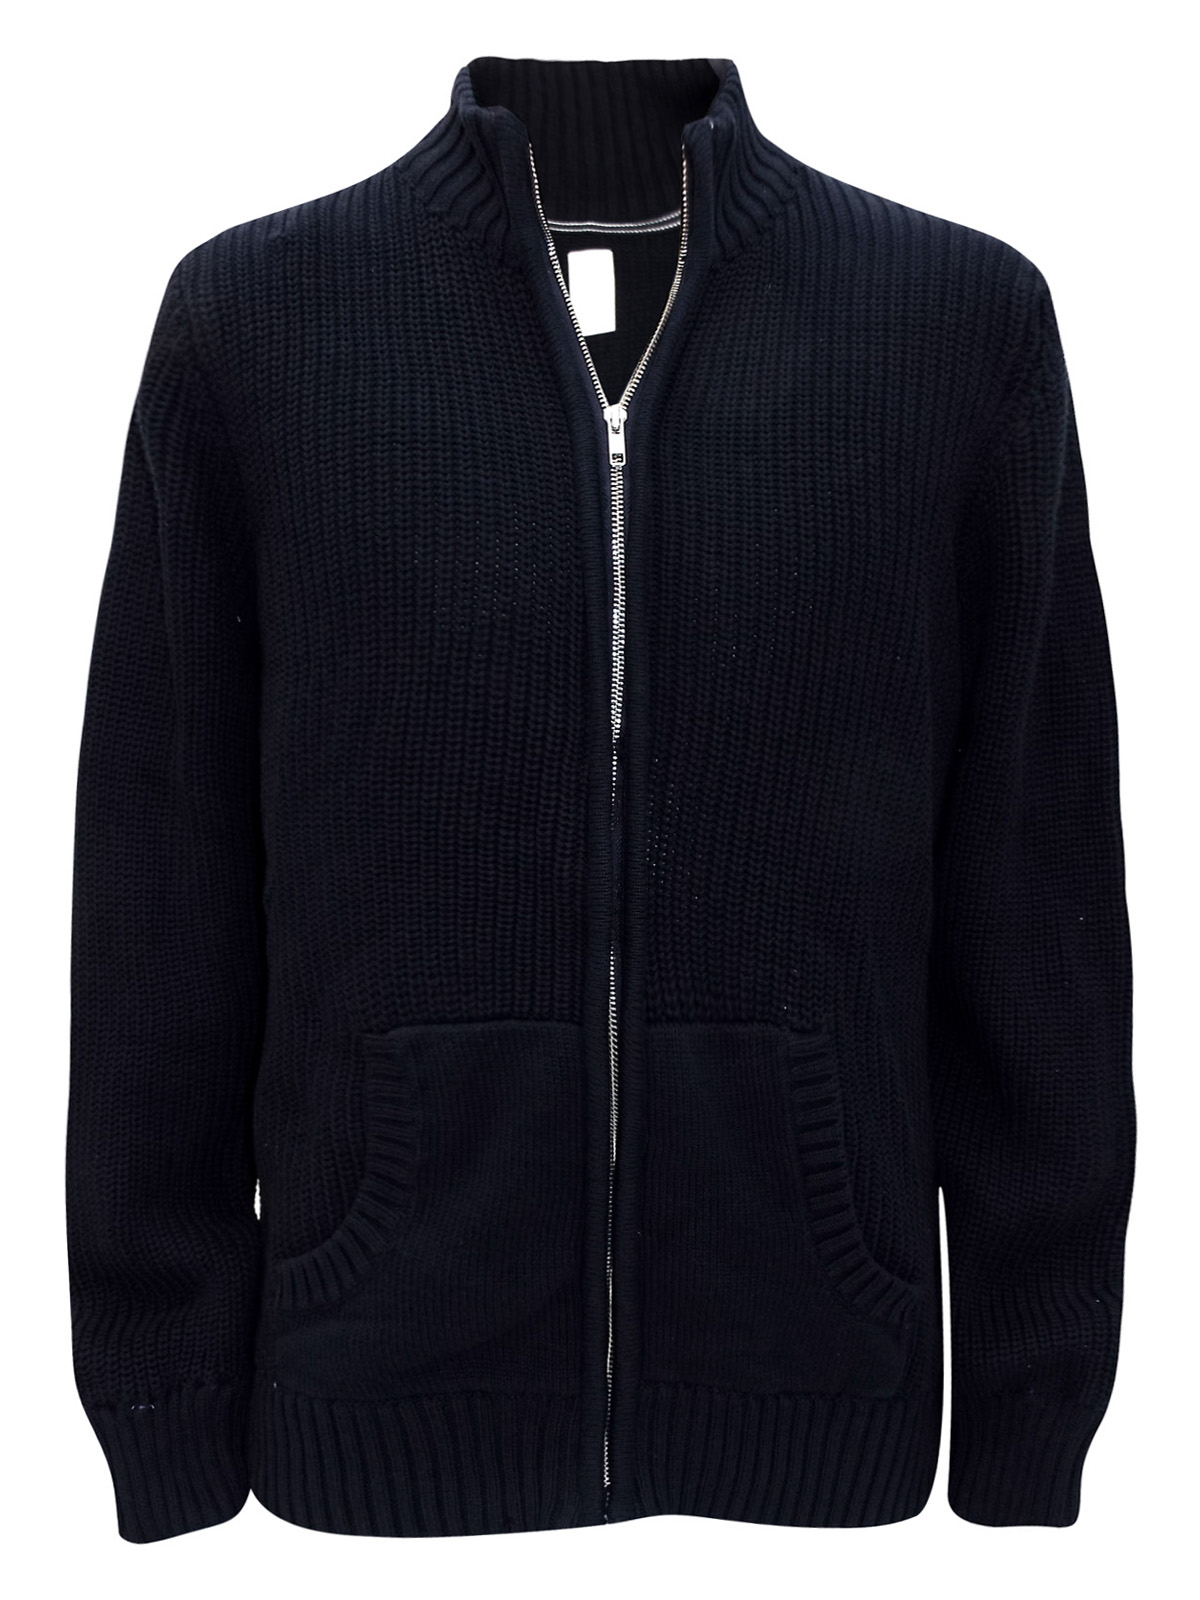 F&F - - F&F NAVY Zip Through Knitted Cardigan - Size Small to XXXLarge